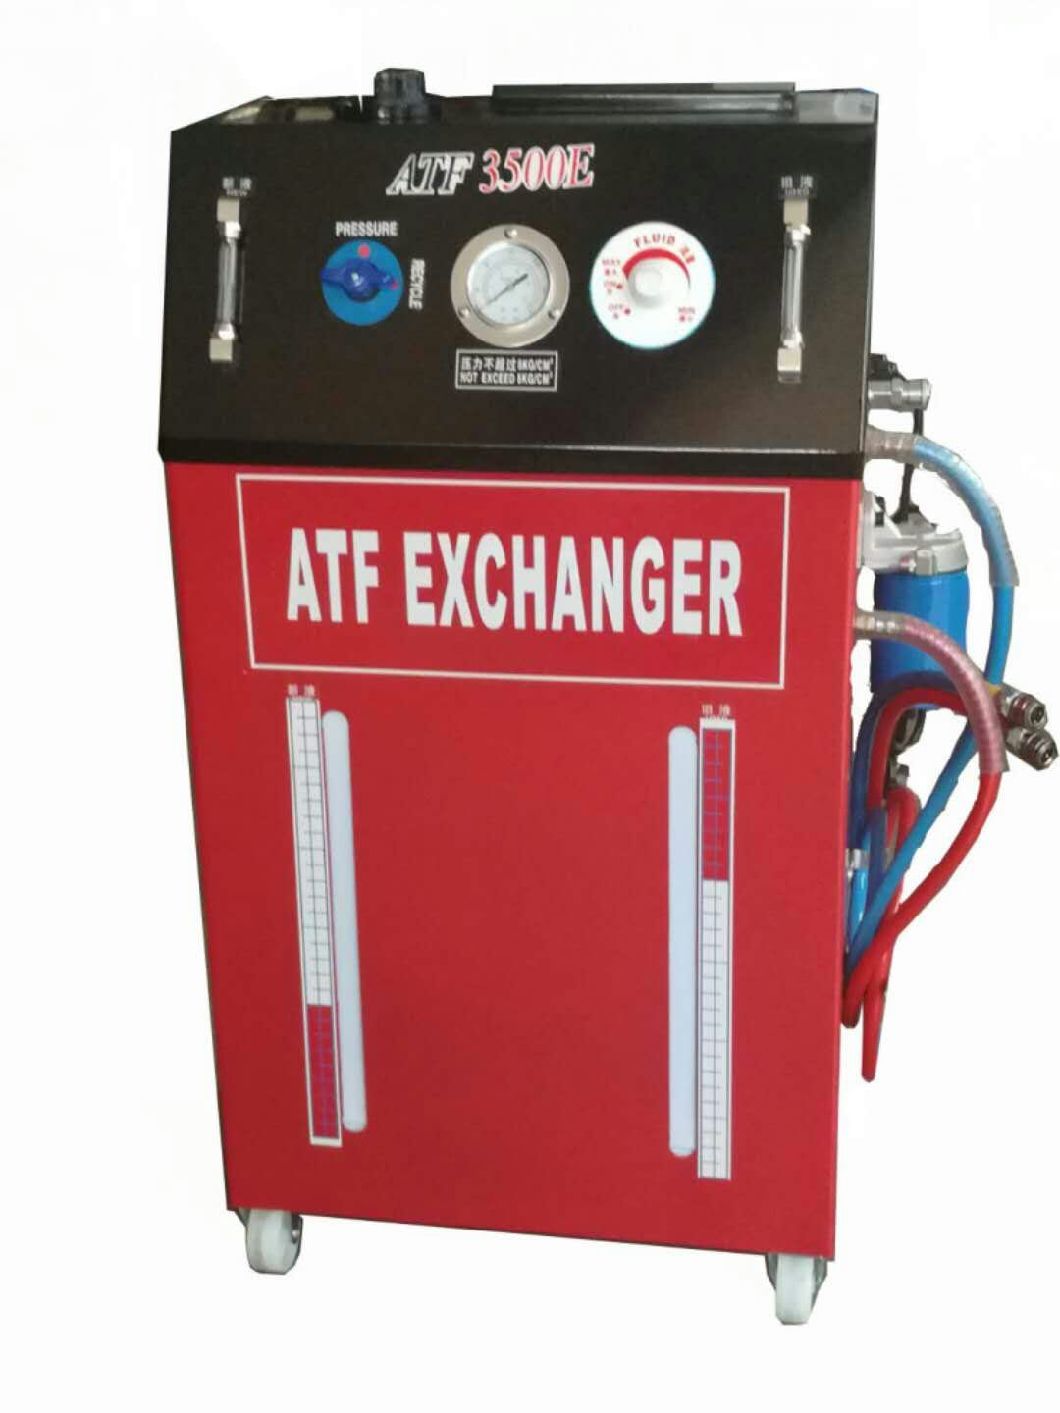 High Quality Auto-Transmission Fluid Oil Exchanger Atf-3500e